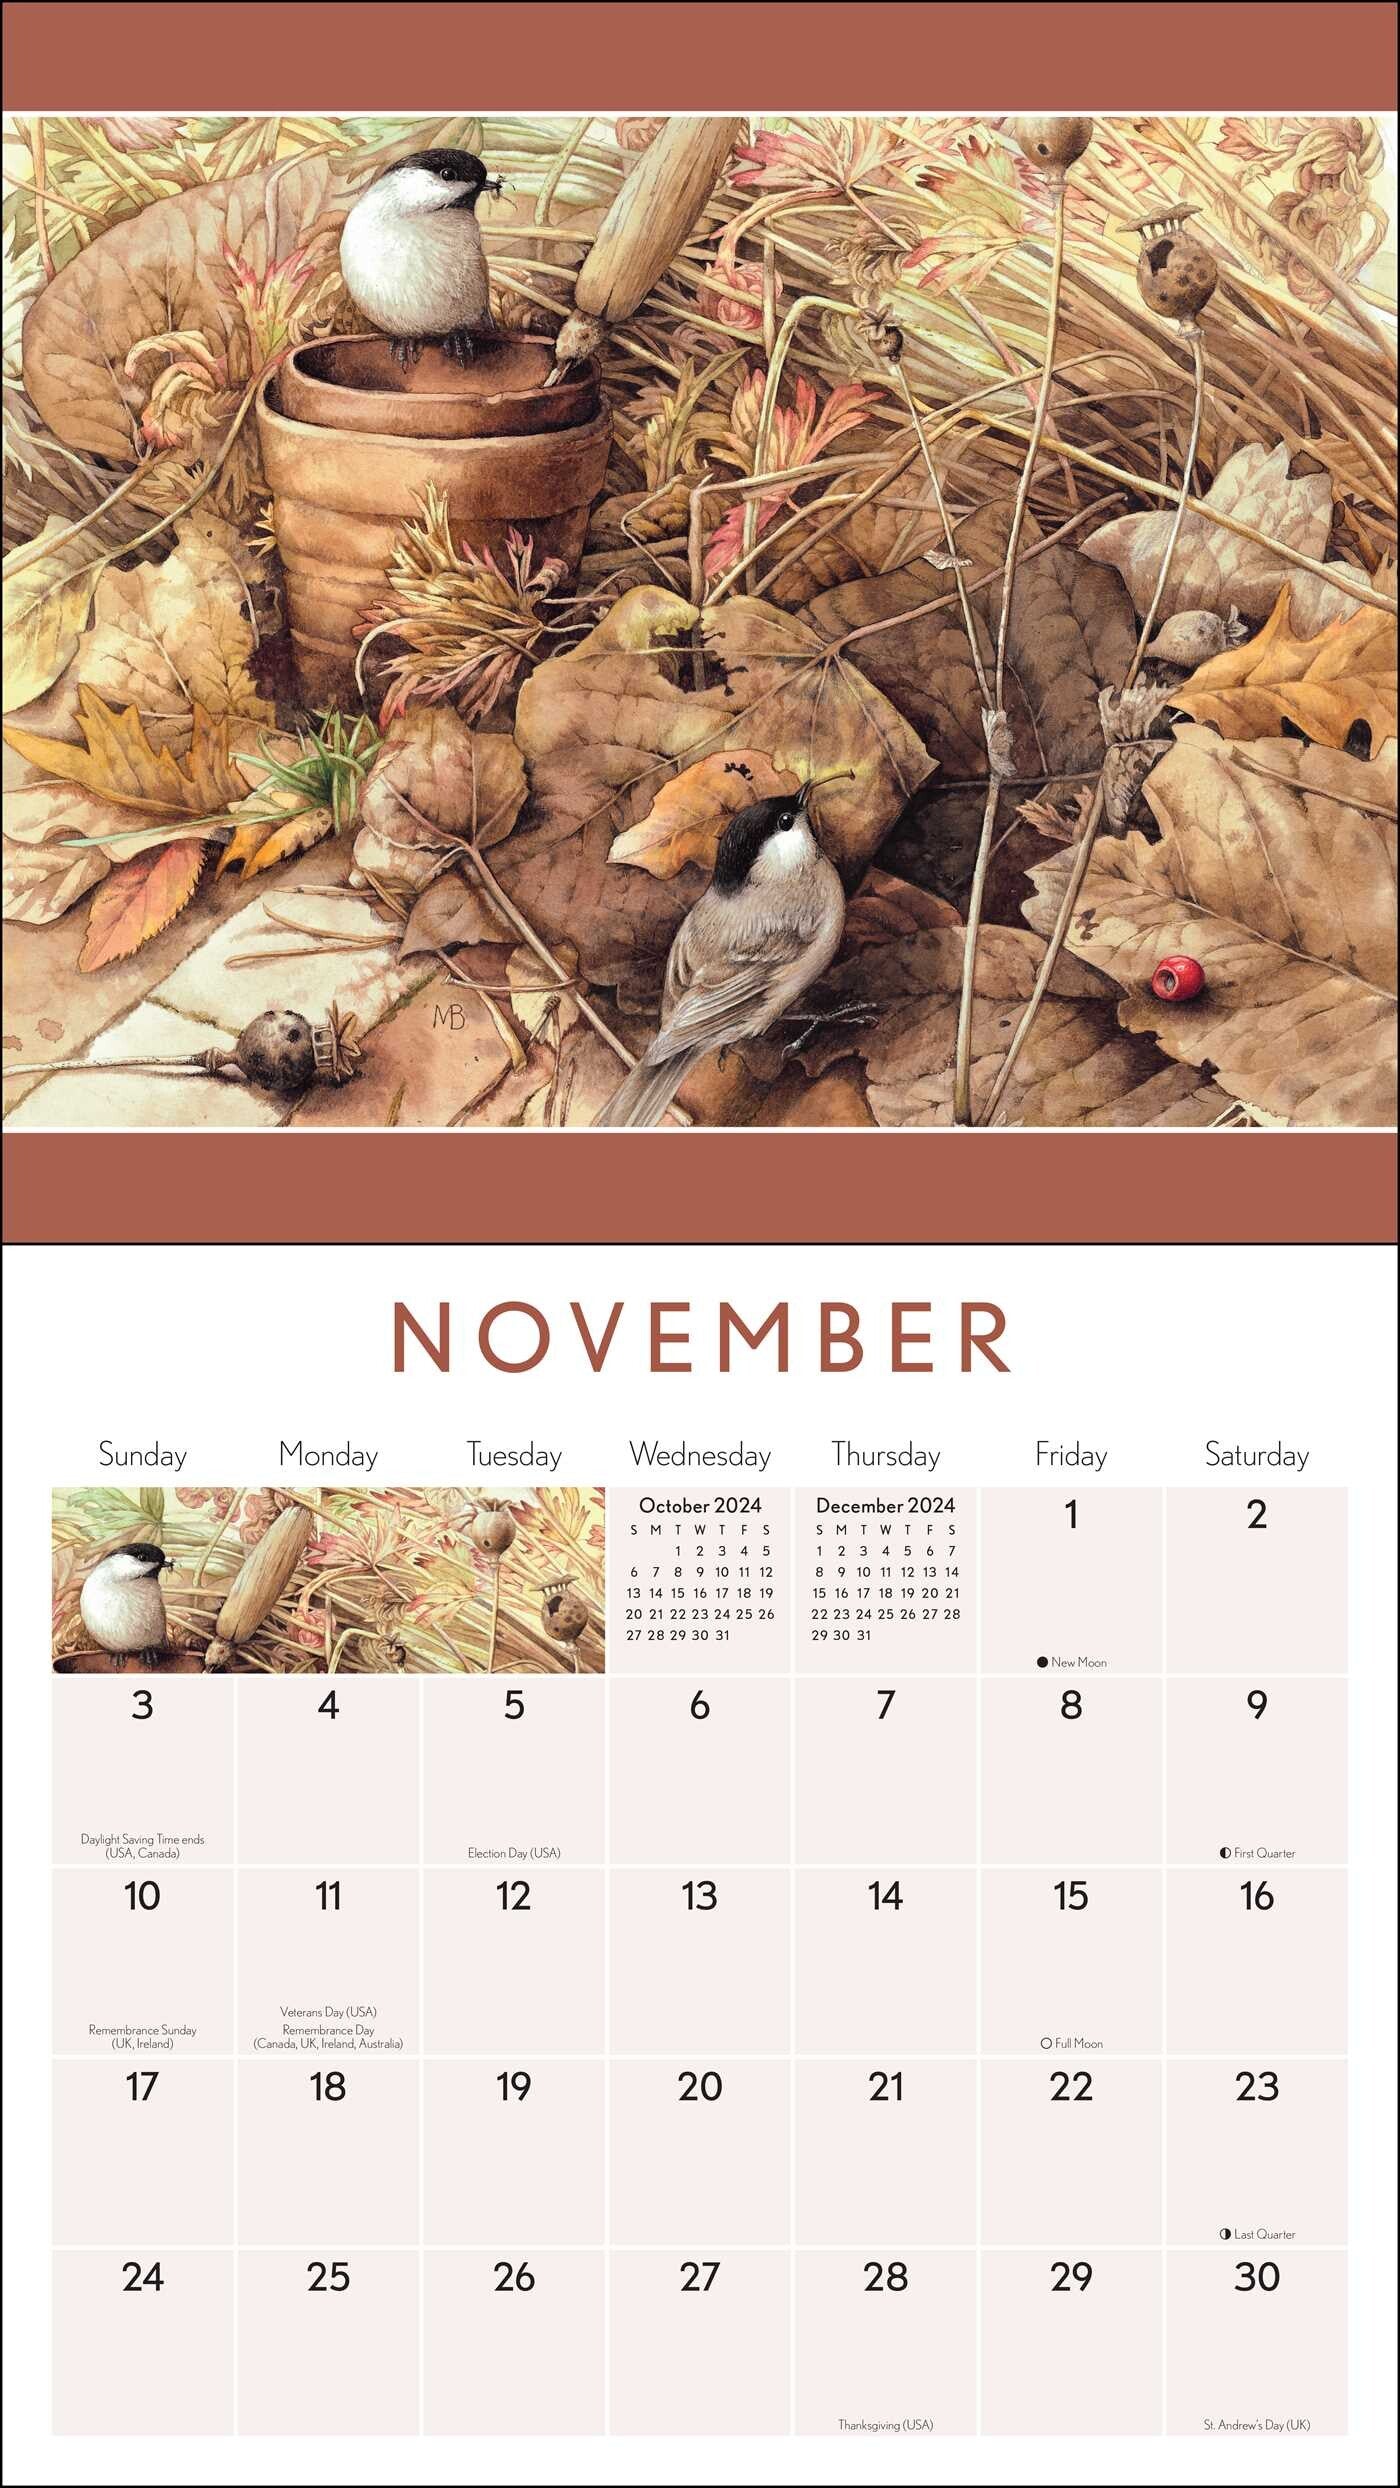 Marjolein Bastin Nature's Inspiration 2024 Wall Calendar with Gift Print    